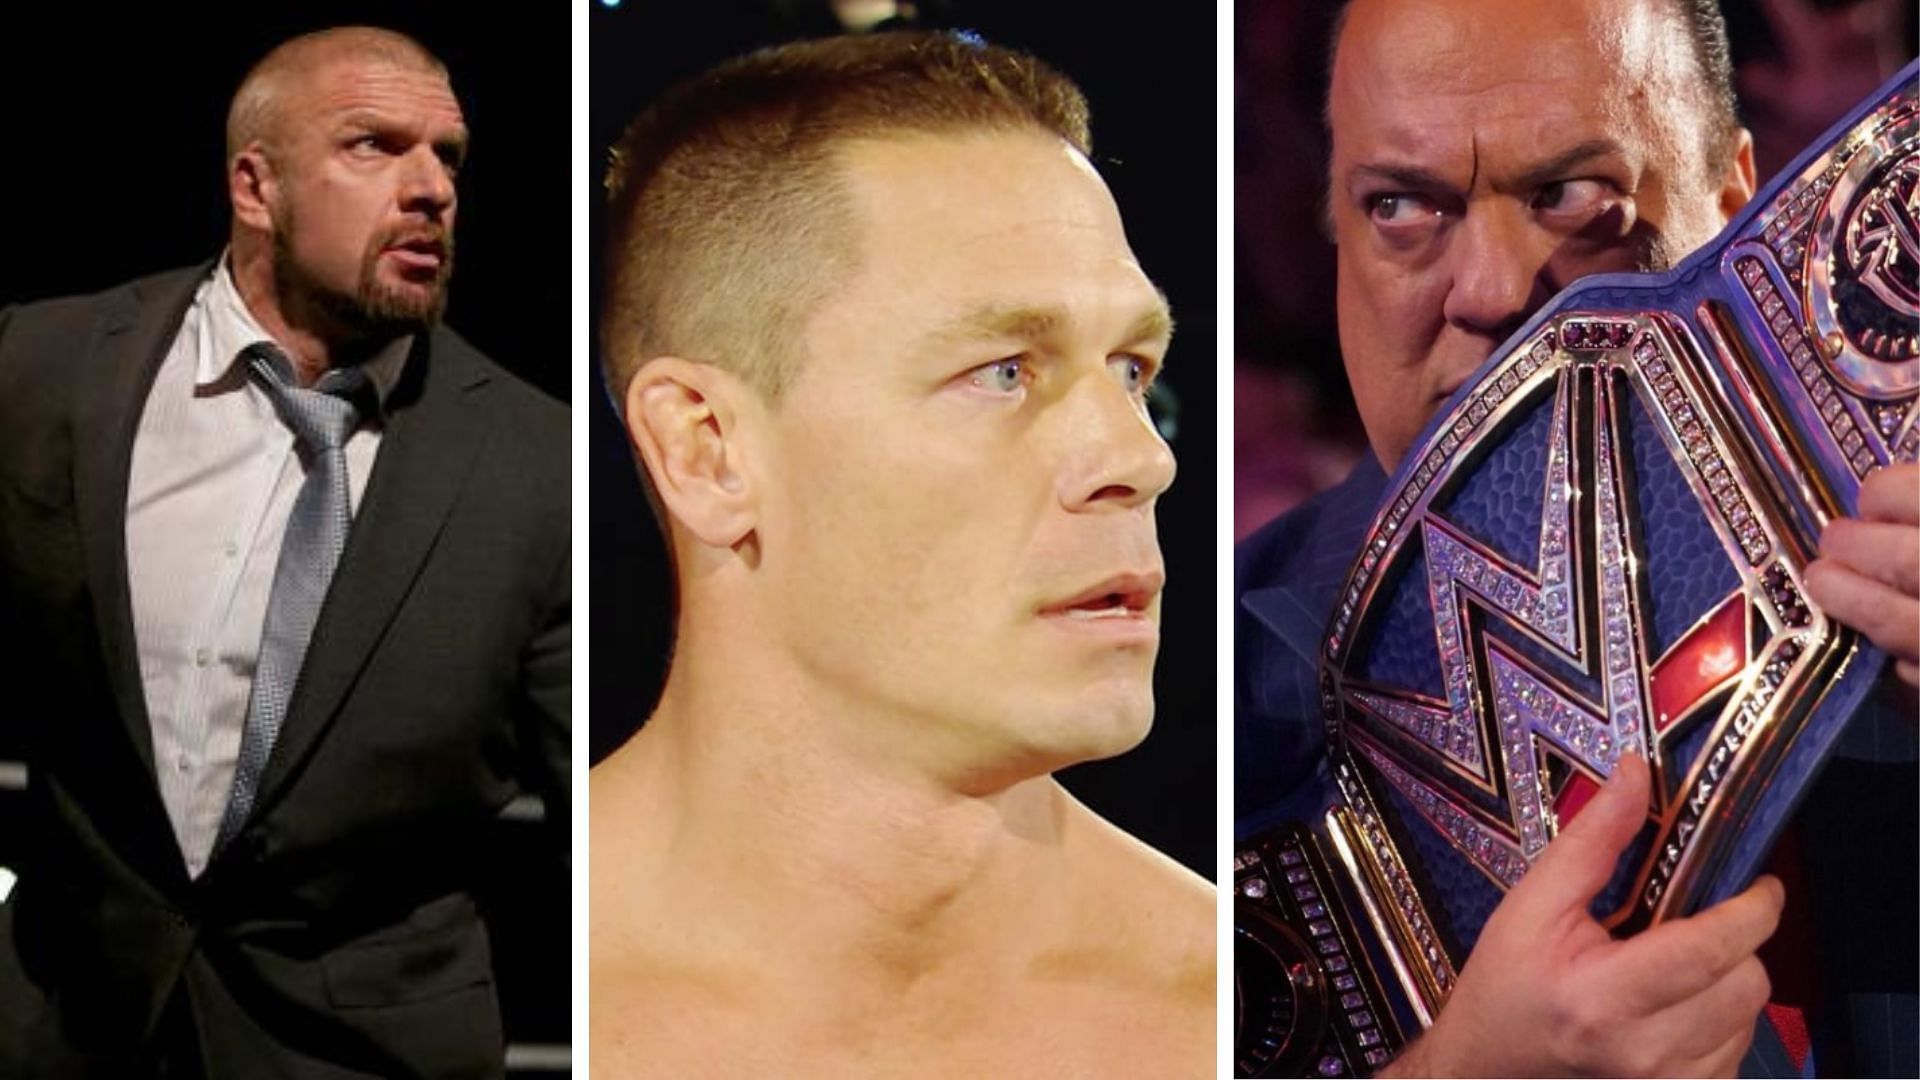 Triple H on the left, John Cena in the middle, Paul Heyman on the right